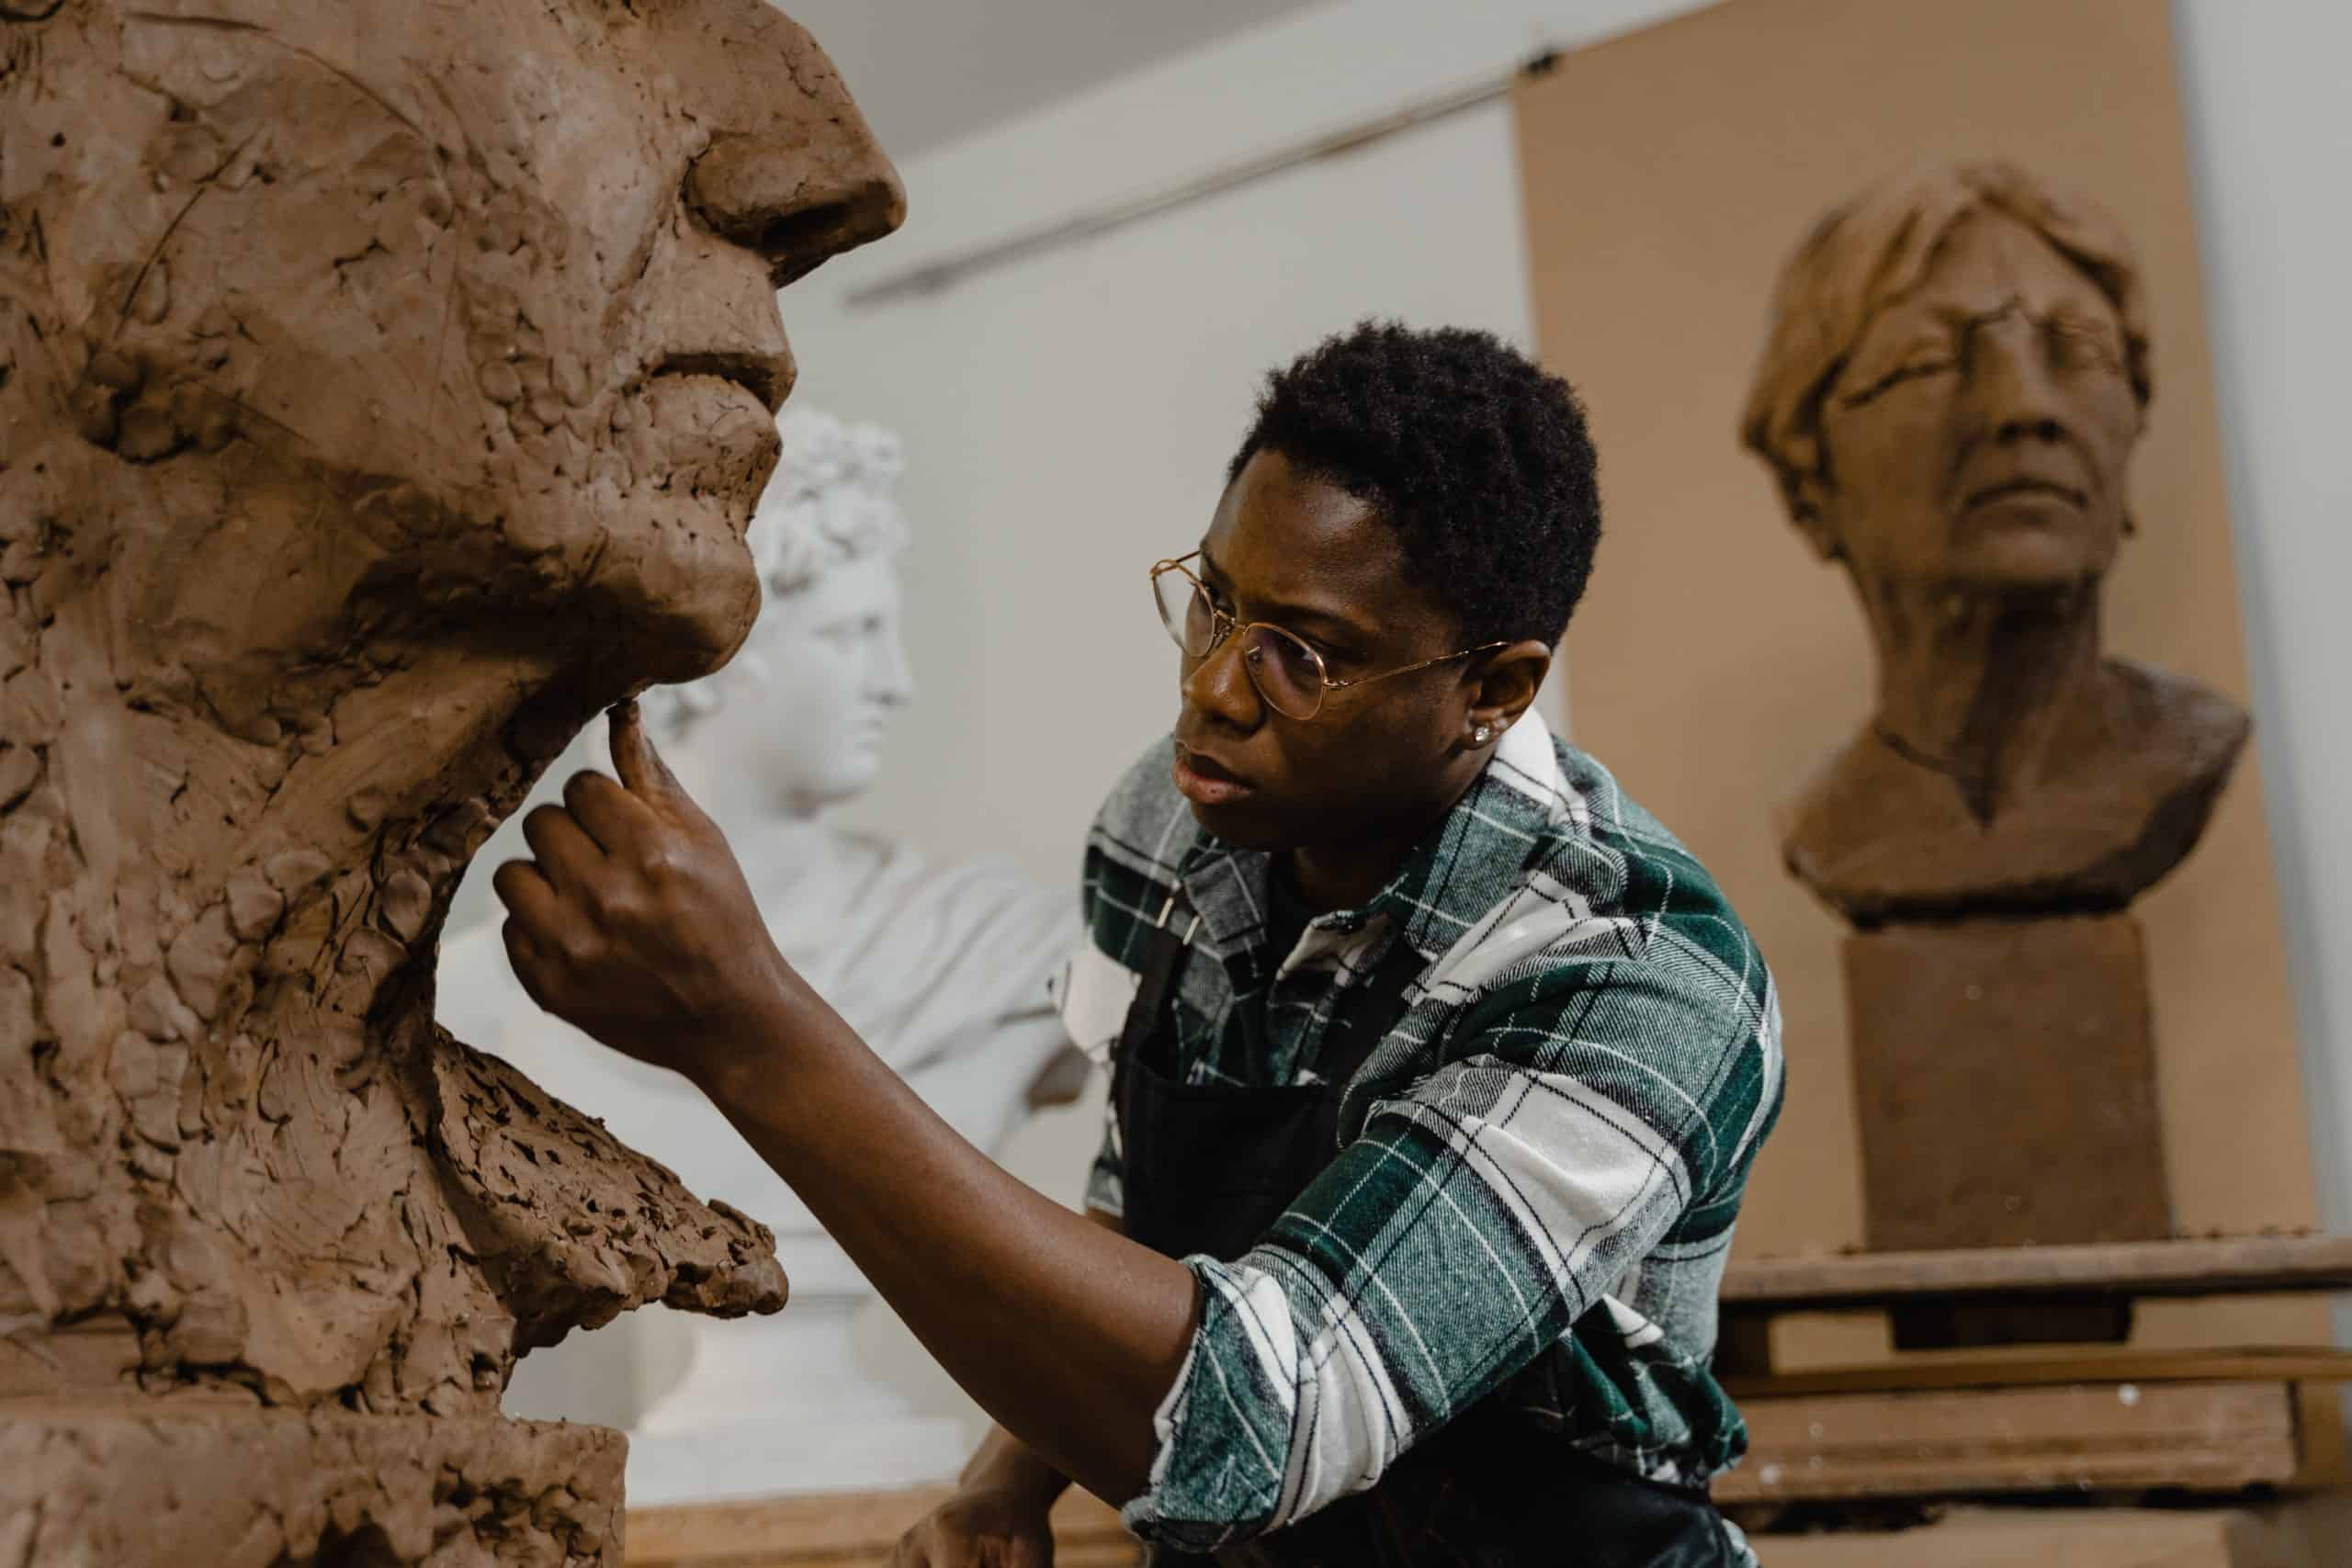 The best sculpting tips for beginners